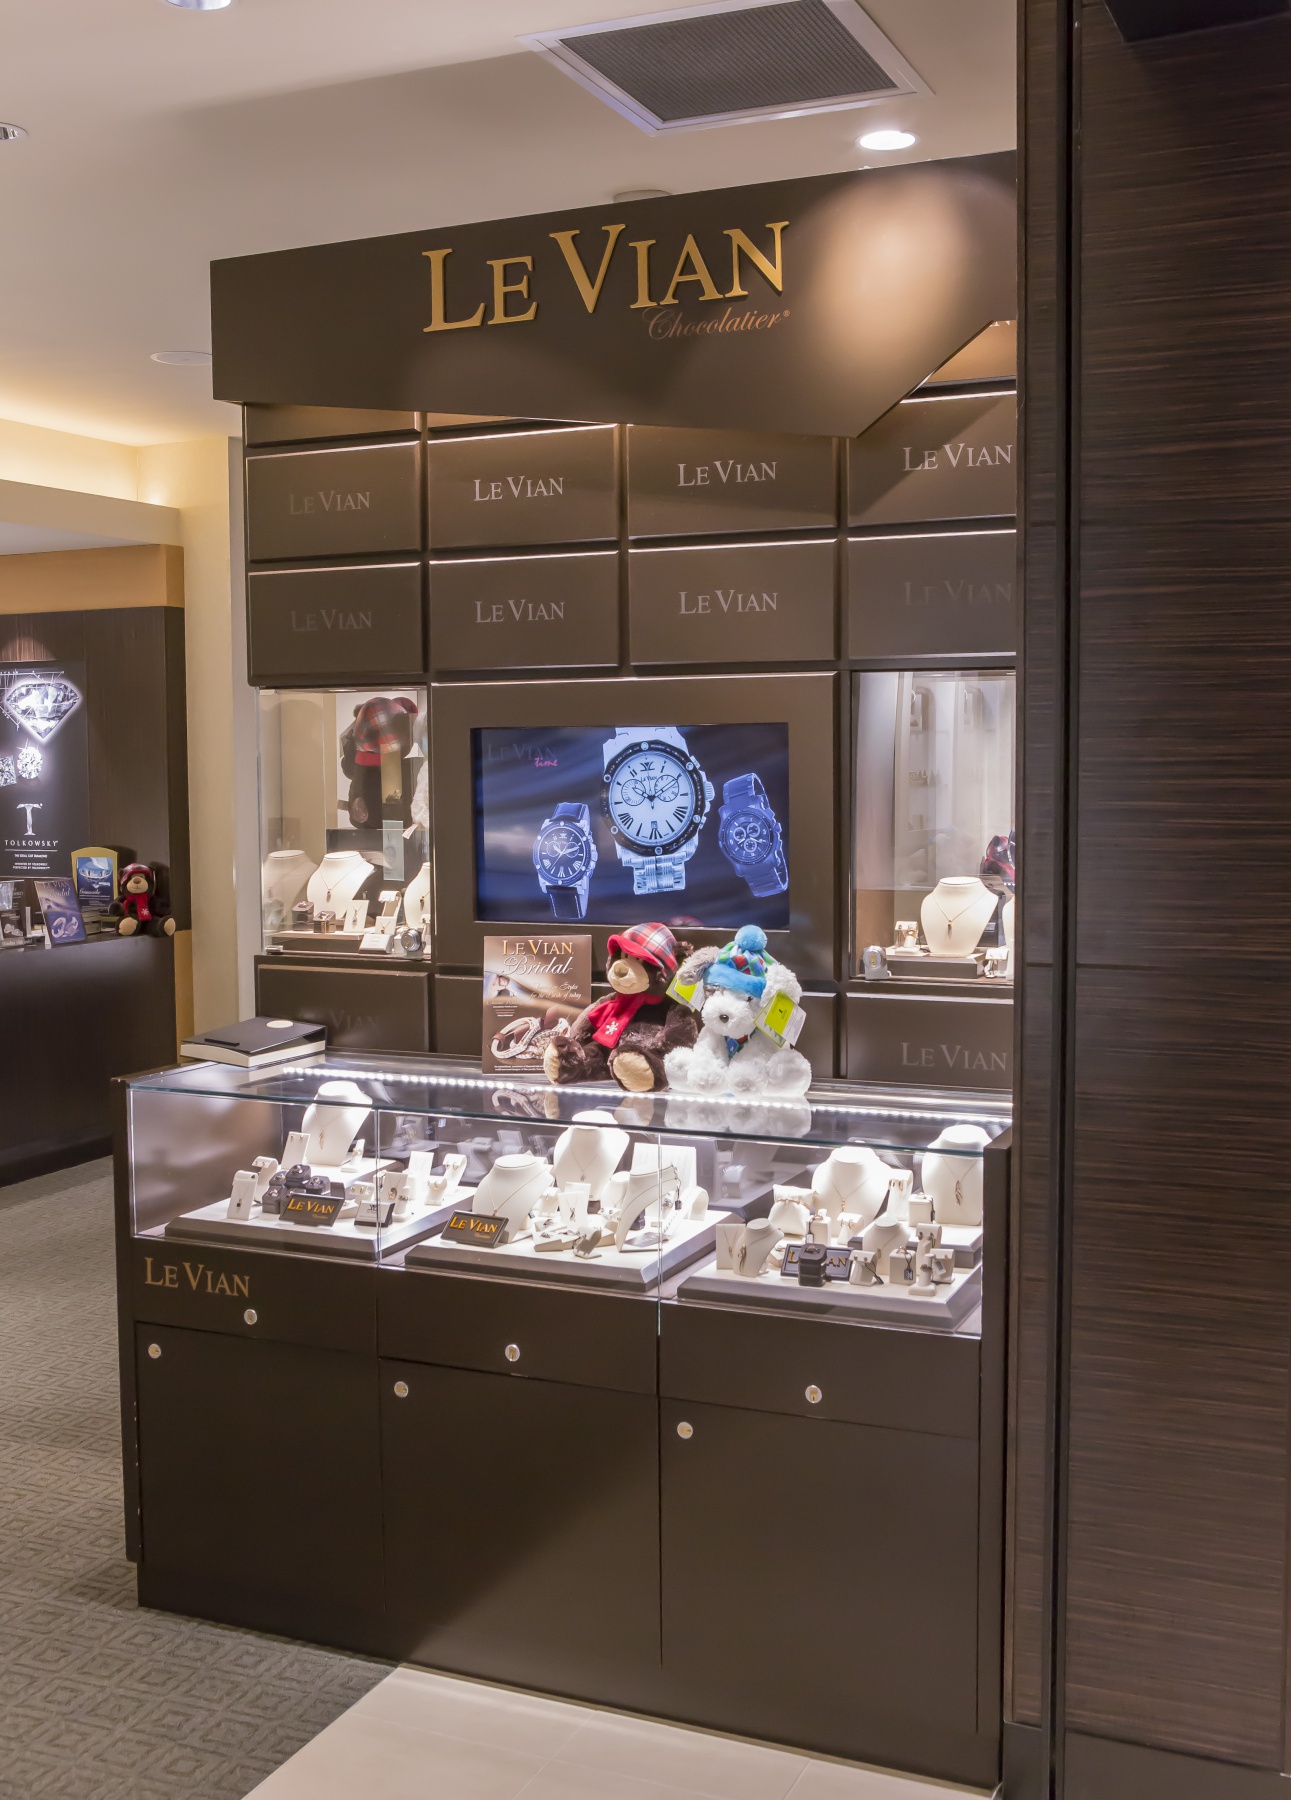 Nationwide Fixture Installations Inc Le Vian Case Study Millwork Packages Retail Rollouts Program Management Signage